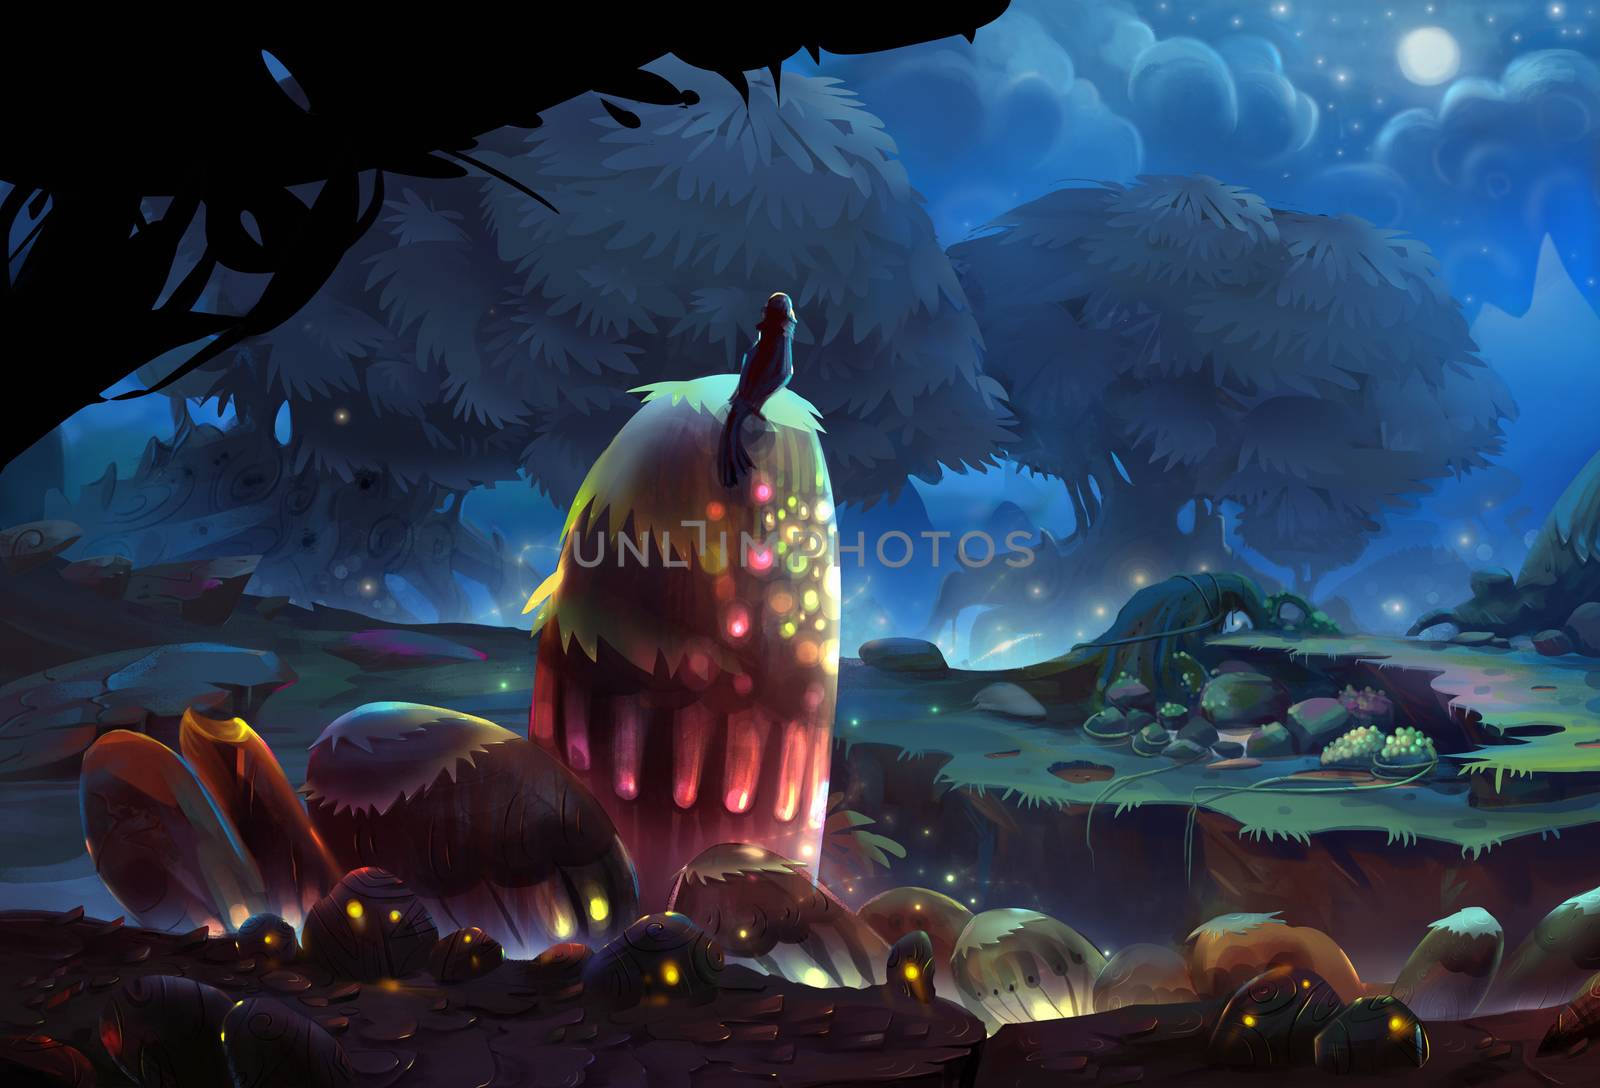 Illustration: The night is coming. The tiny bird stops and enjoy the moment of uprising of the fireflies. One of most amazing places in our tiny bird's journey of adventure. - Fantastic Scene Design